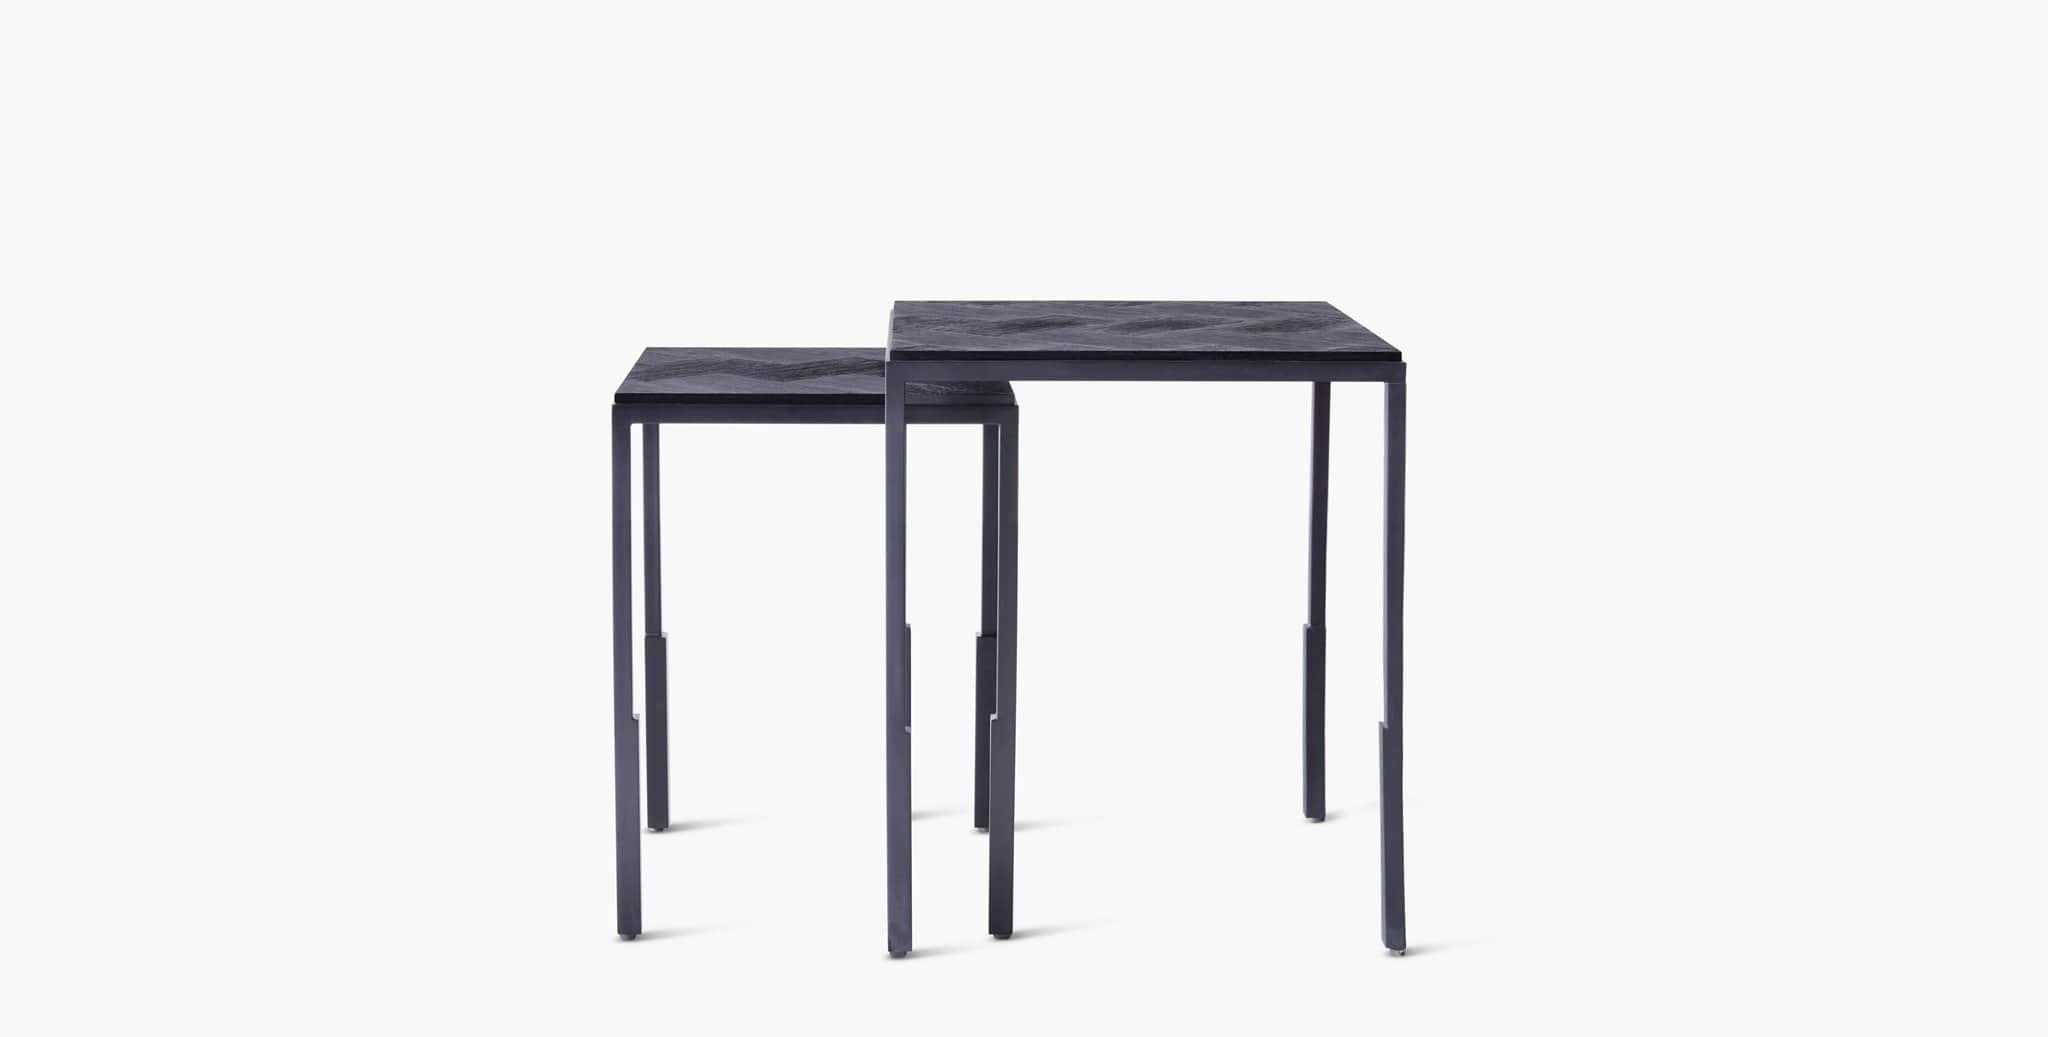 Our Cicely Table has an intriguing incised blackened wood top featuring a contemporary geometric pattern placed on a steel base. Our handcrafted finishes are inspired by variations within natural textures. Each selection is slightly unique.

Black